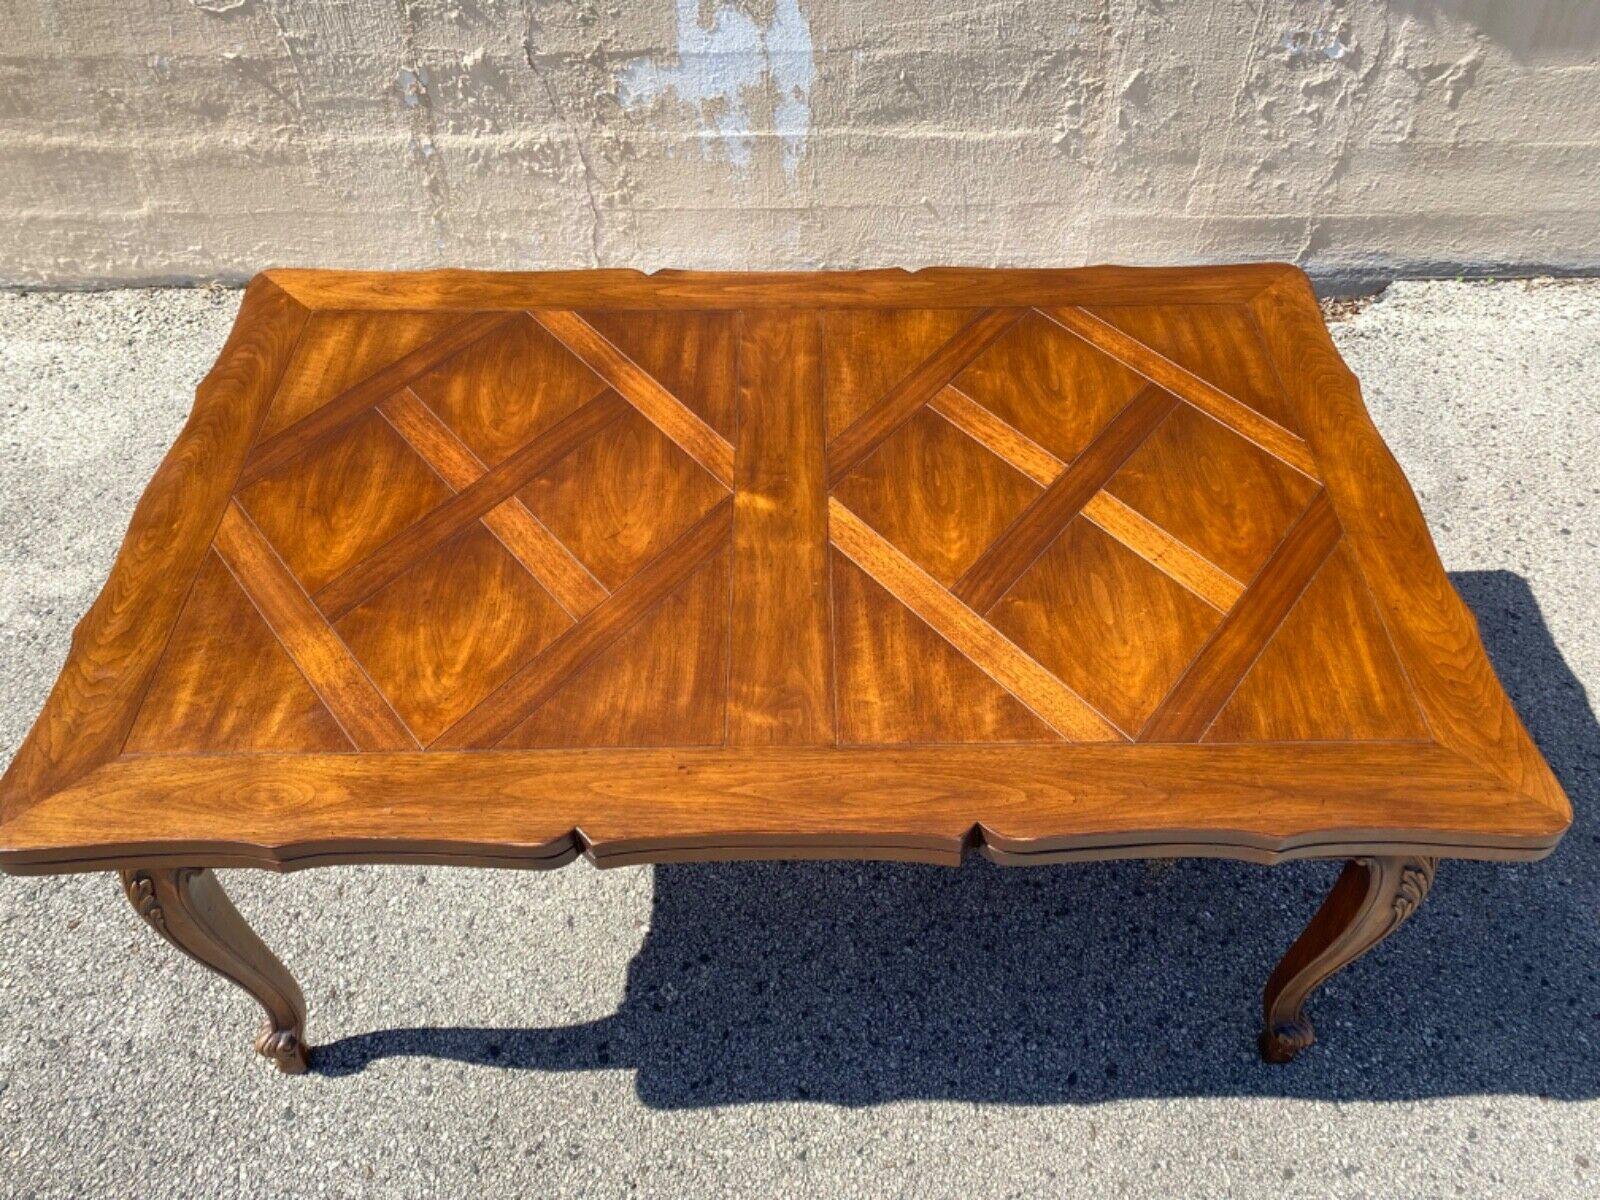 Vintage French Country Provincial Style Walnut Parquetry Inlay Extension Dining Table. Item features beautiful solid wood construction, shapely cabriole legs with floral carved knees, stunning parquetry inlaid top and extension leaves, high quality